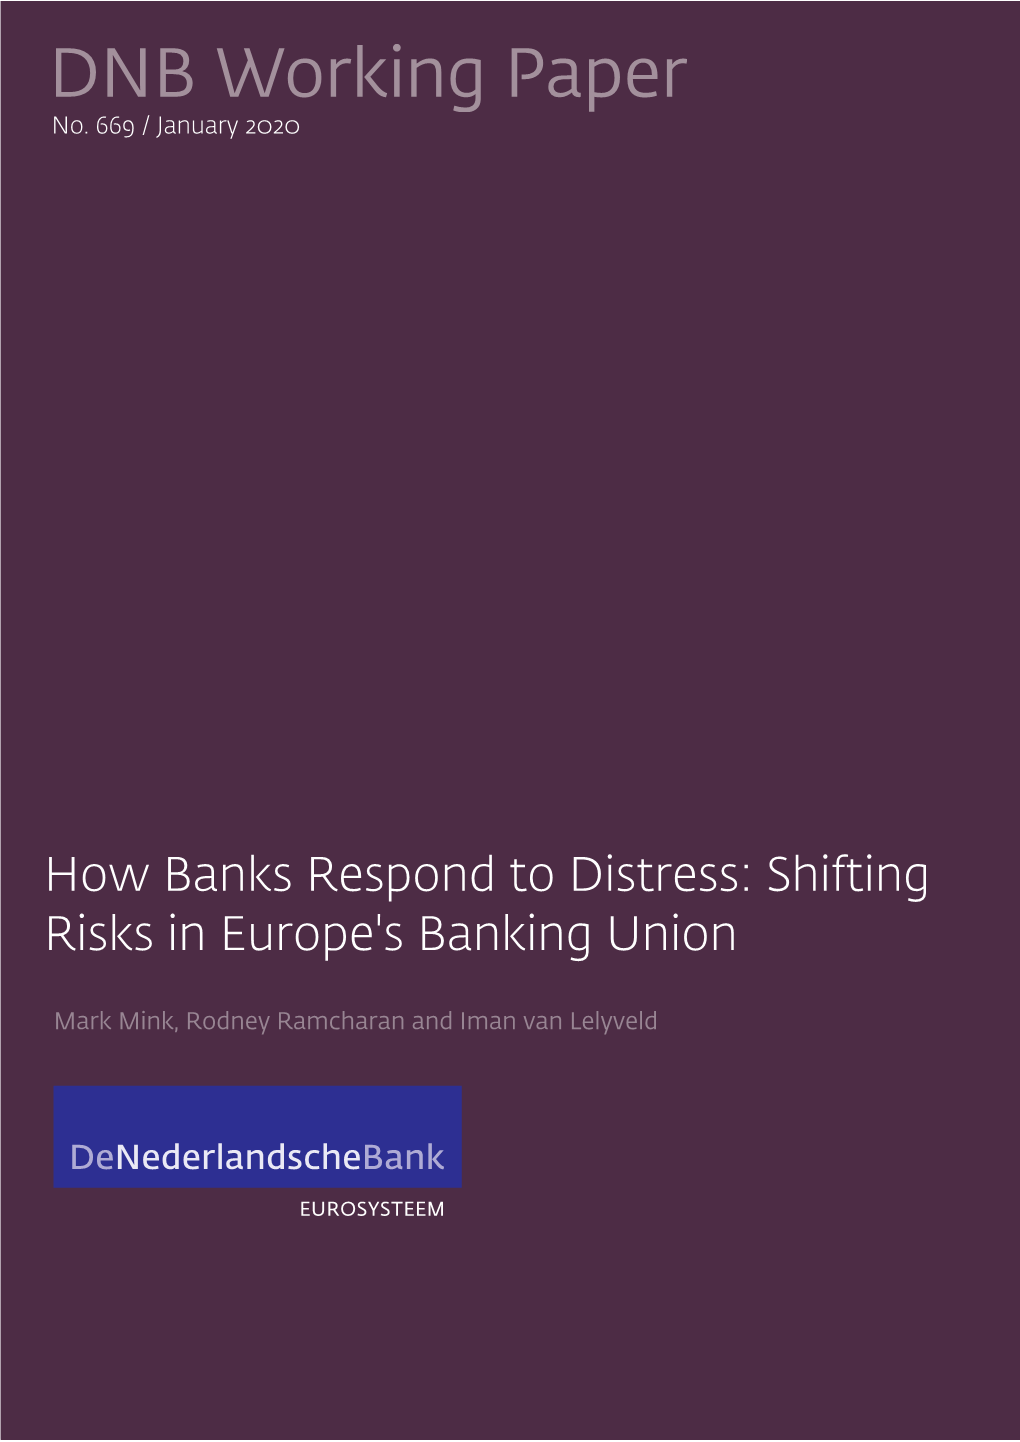 How Banks Respond to Distress: Shifting Risks in Europe's Banking Union